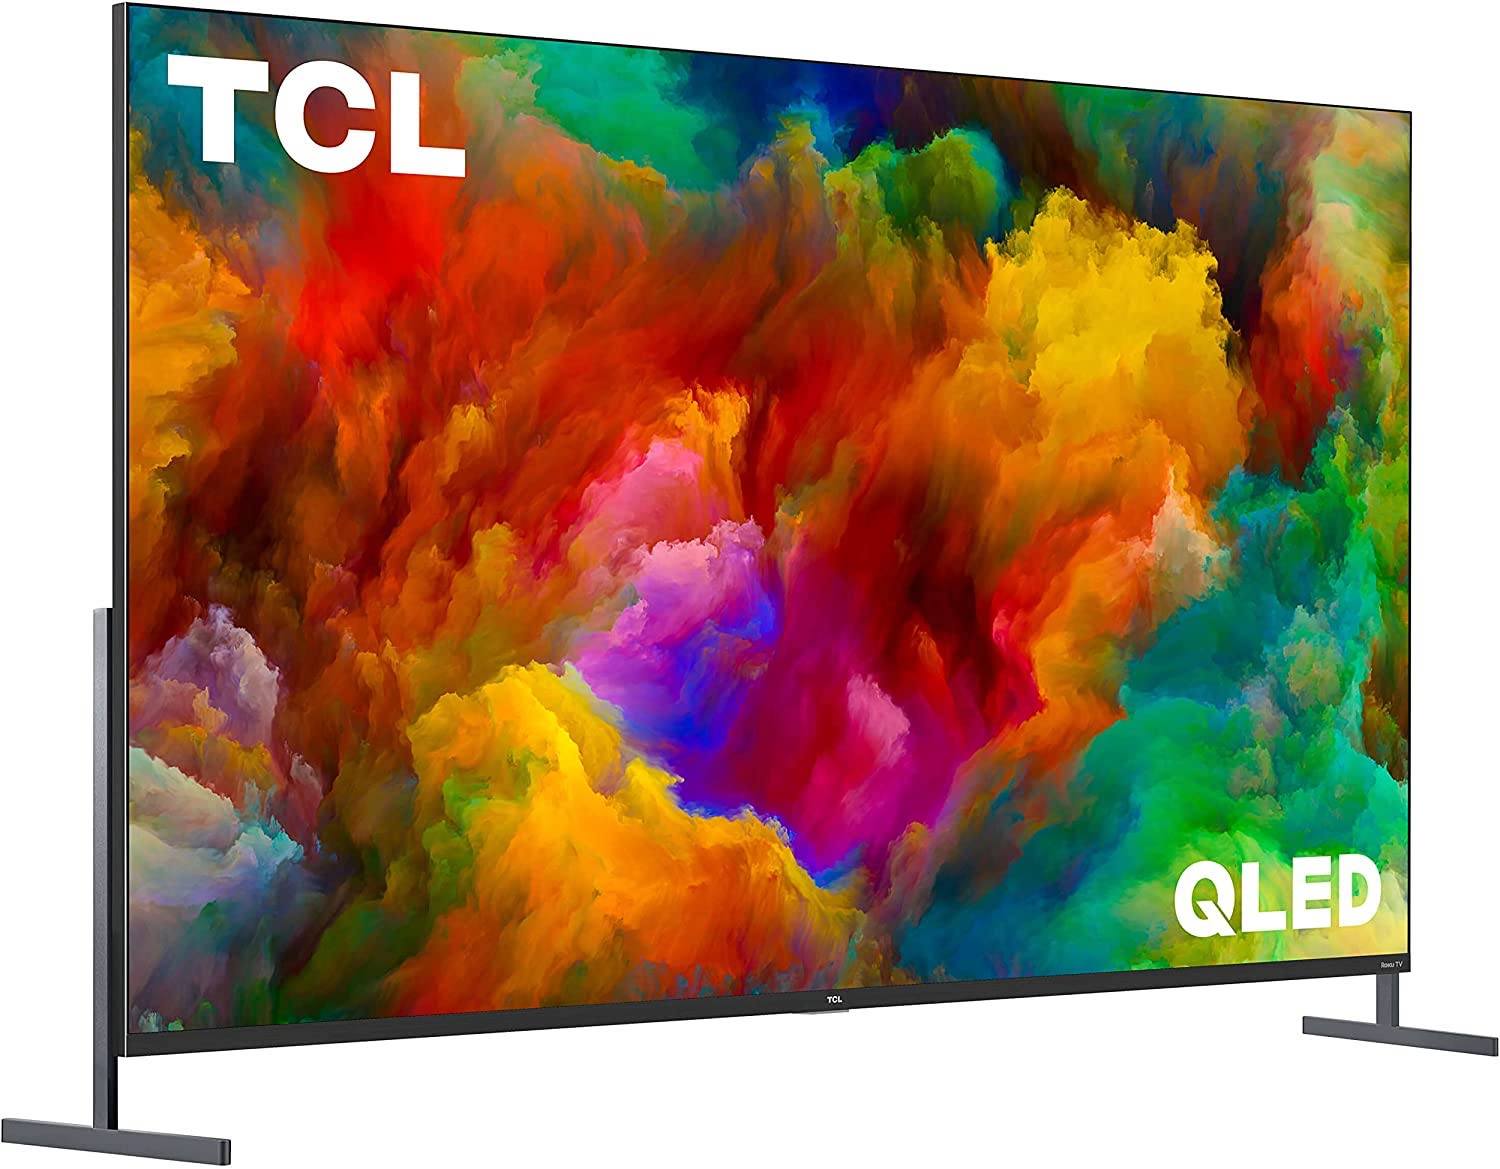 TCL Unveils 85” TVs for the Home Theater Experience